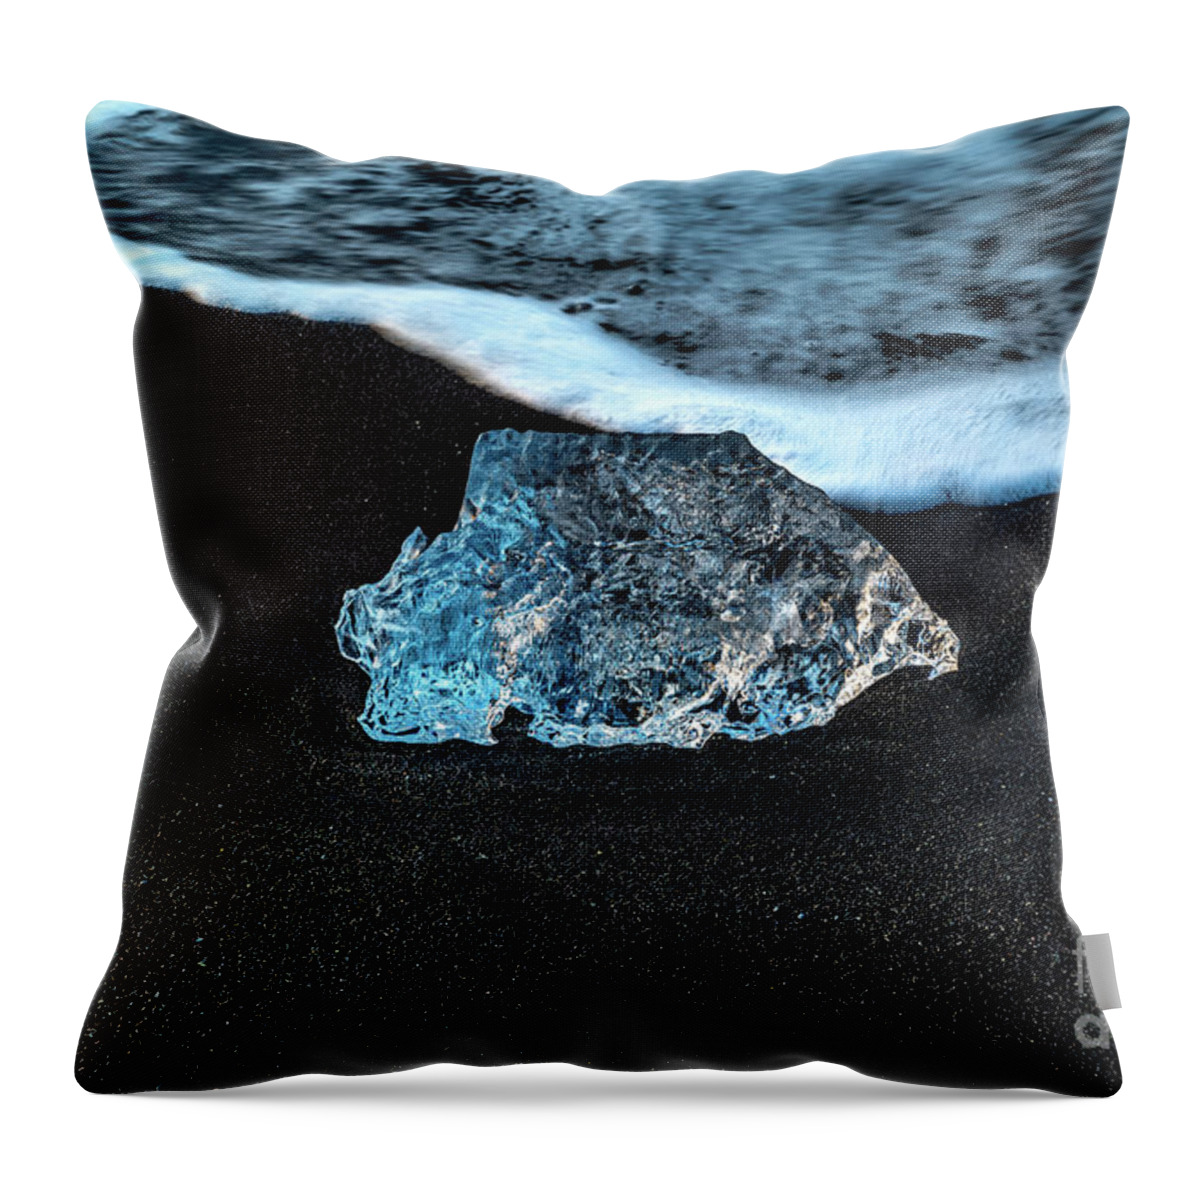 Glacial Beach Ice 1 Throw Pillow featuring the photograph Glacial Beach Ice 1 by M G Whittingham